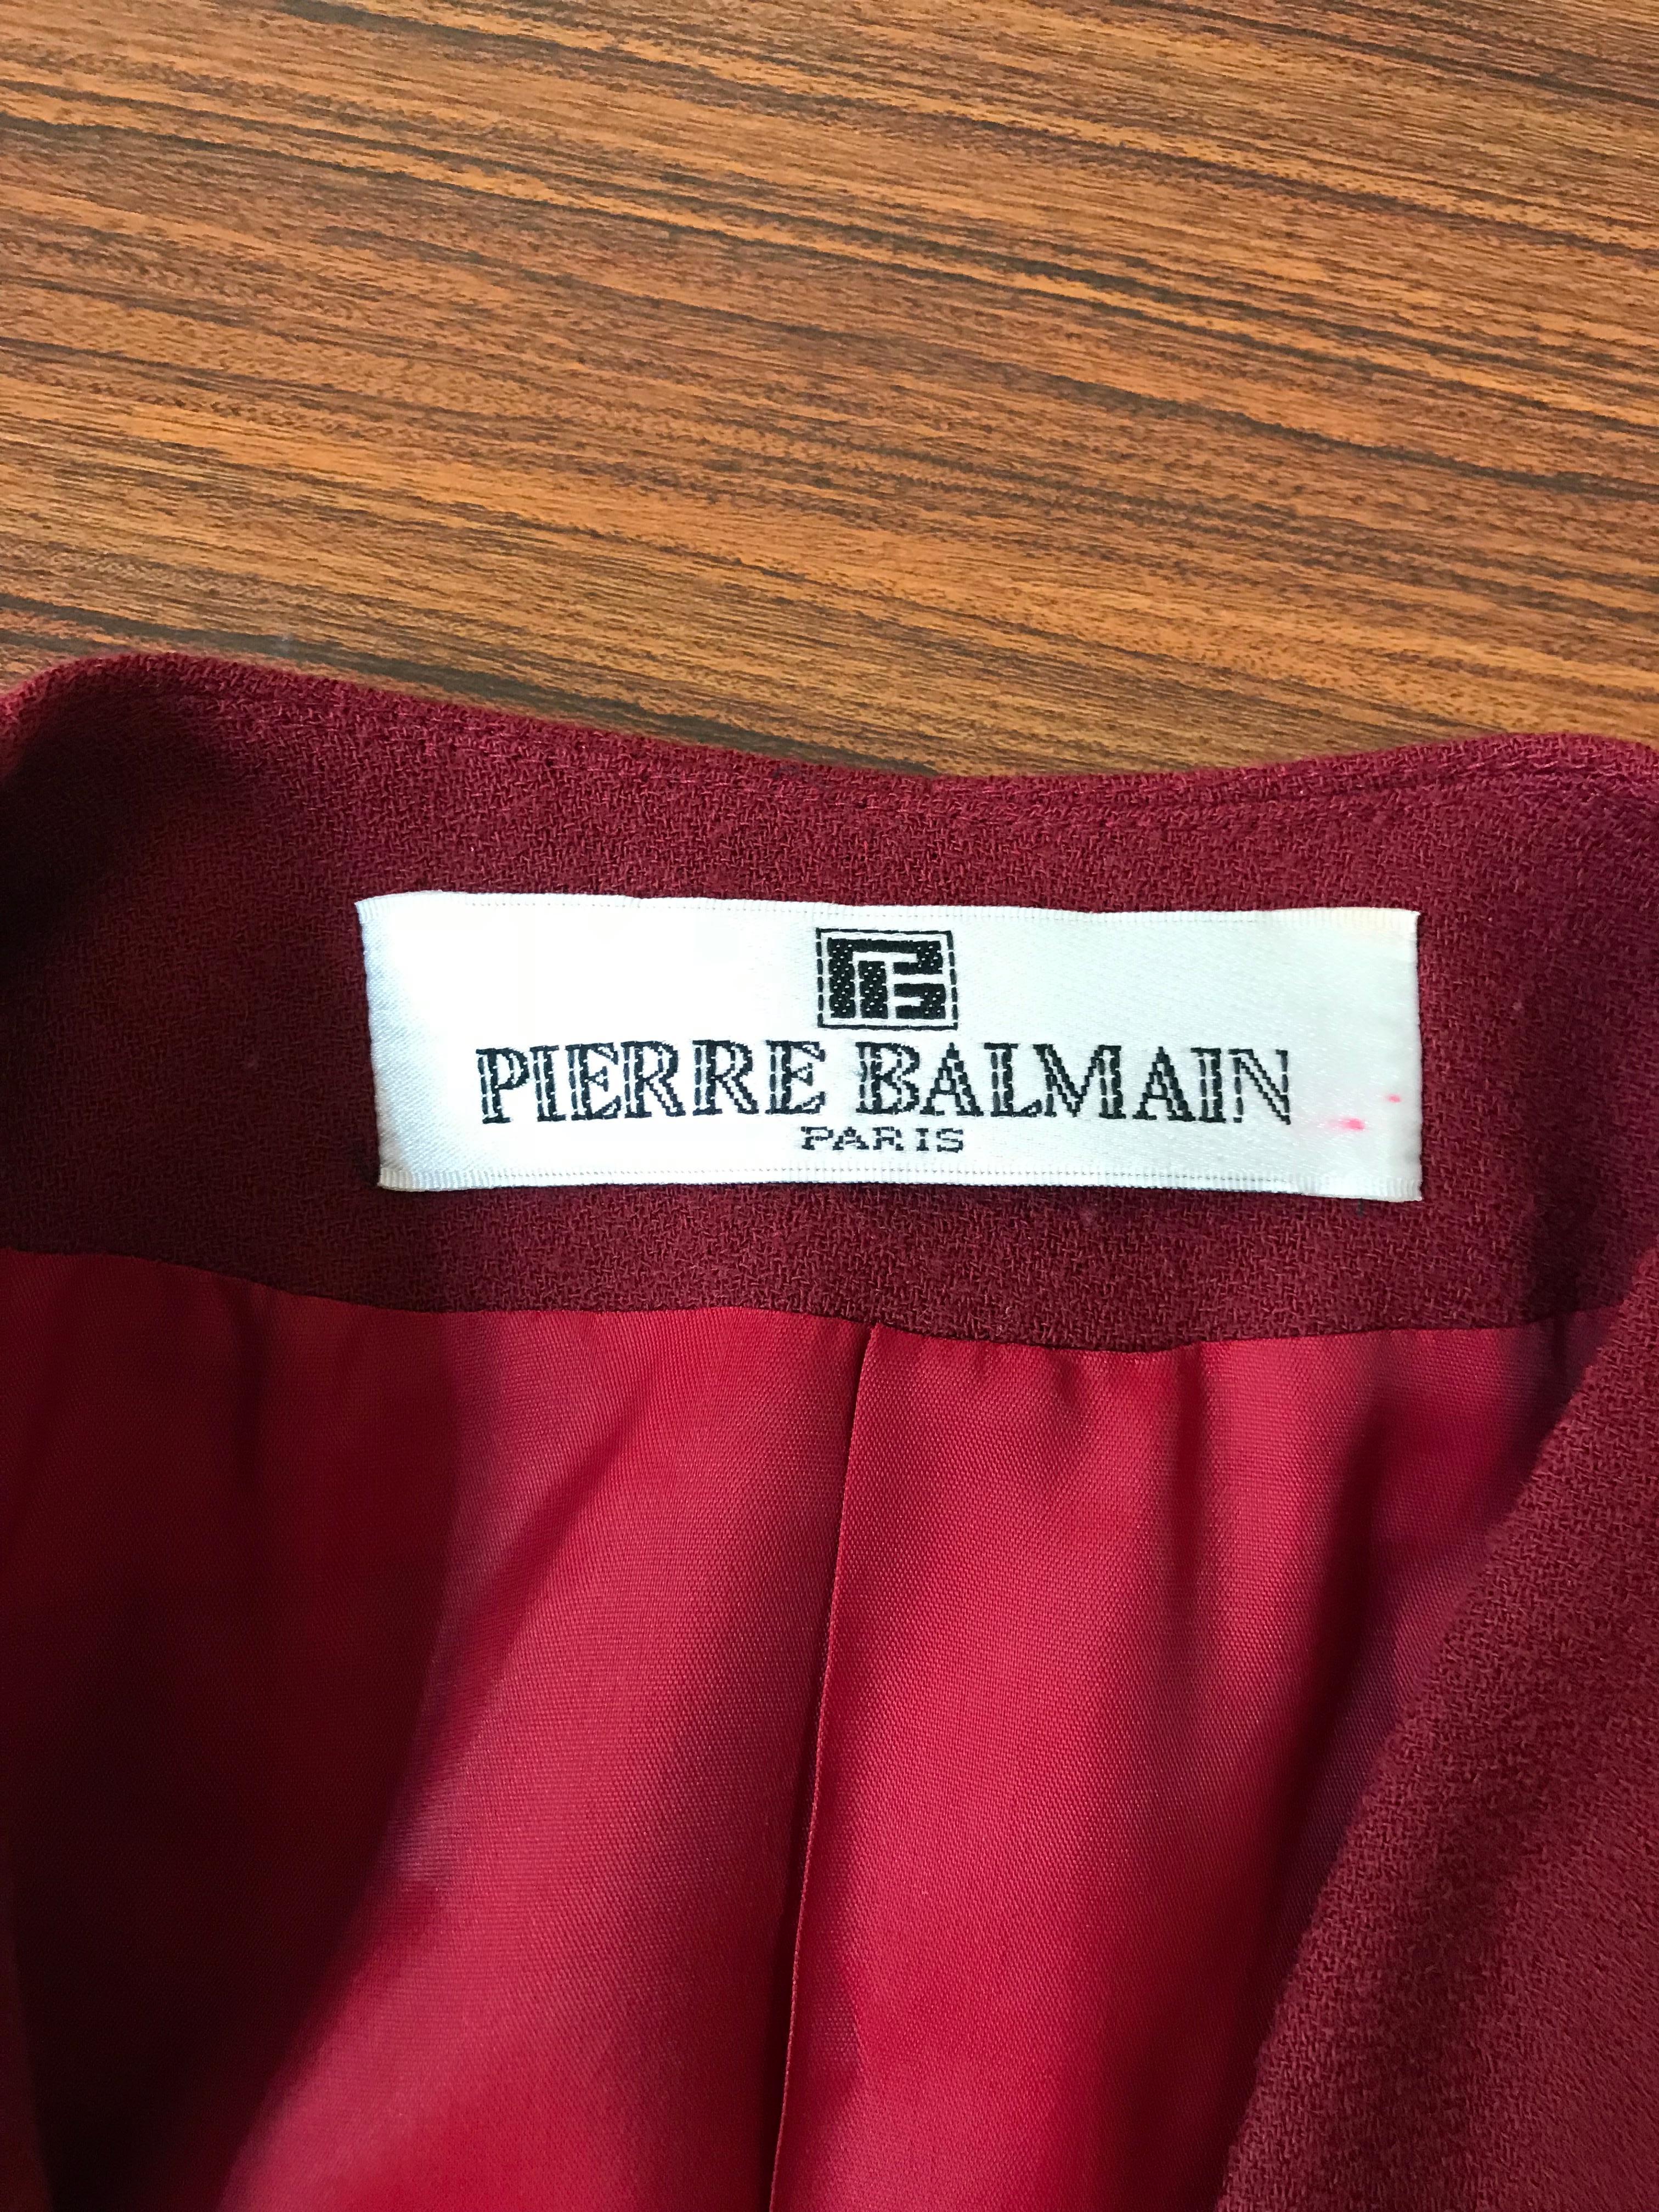 Pierre Balmain 1980s Cranberry Red Beaded Embroidered Sleeve Jacket Skirt Suit  1